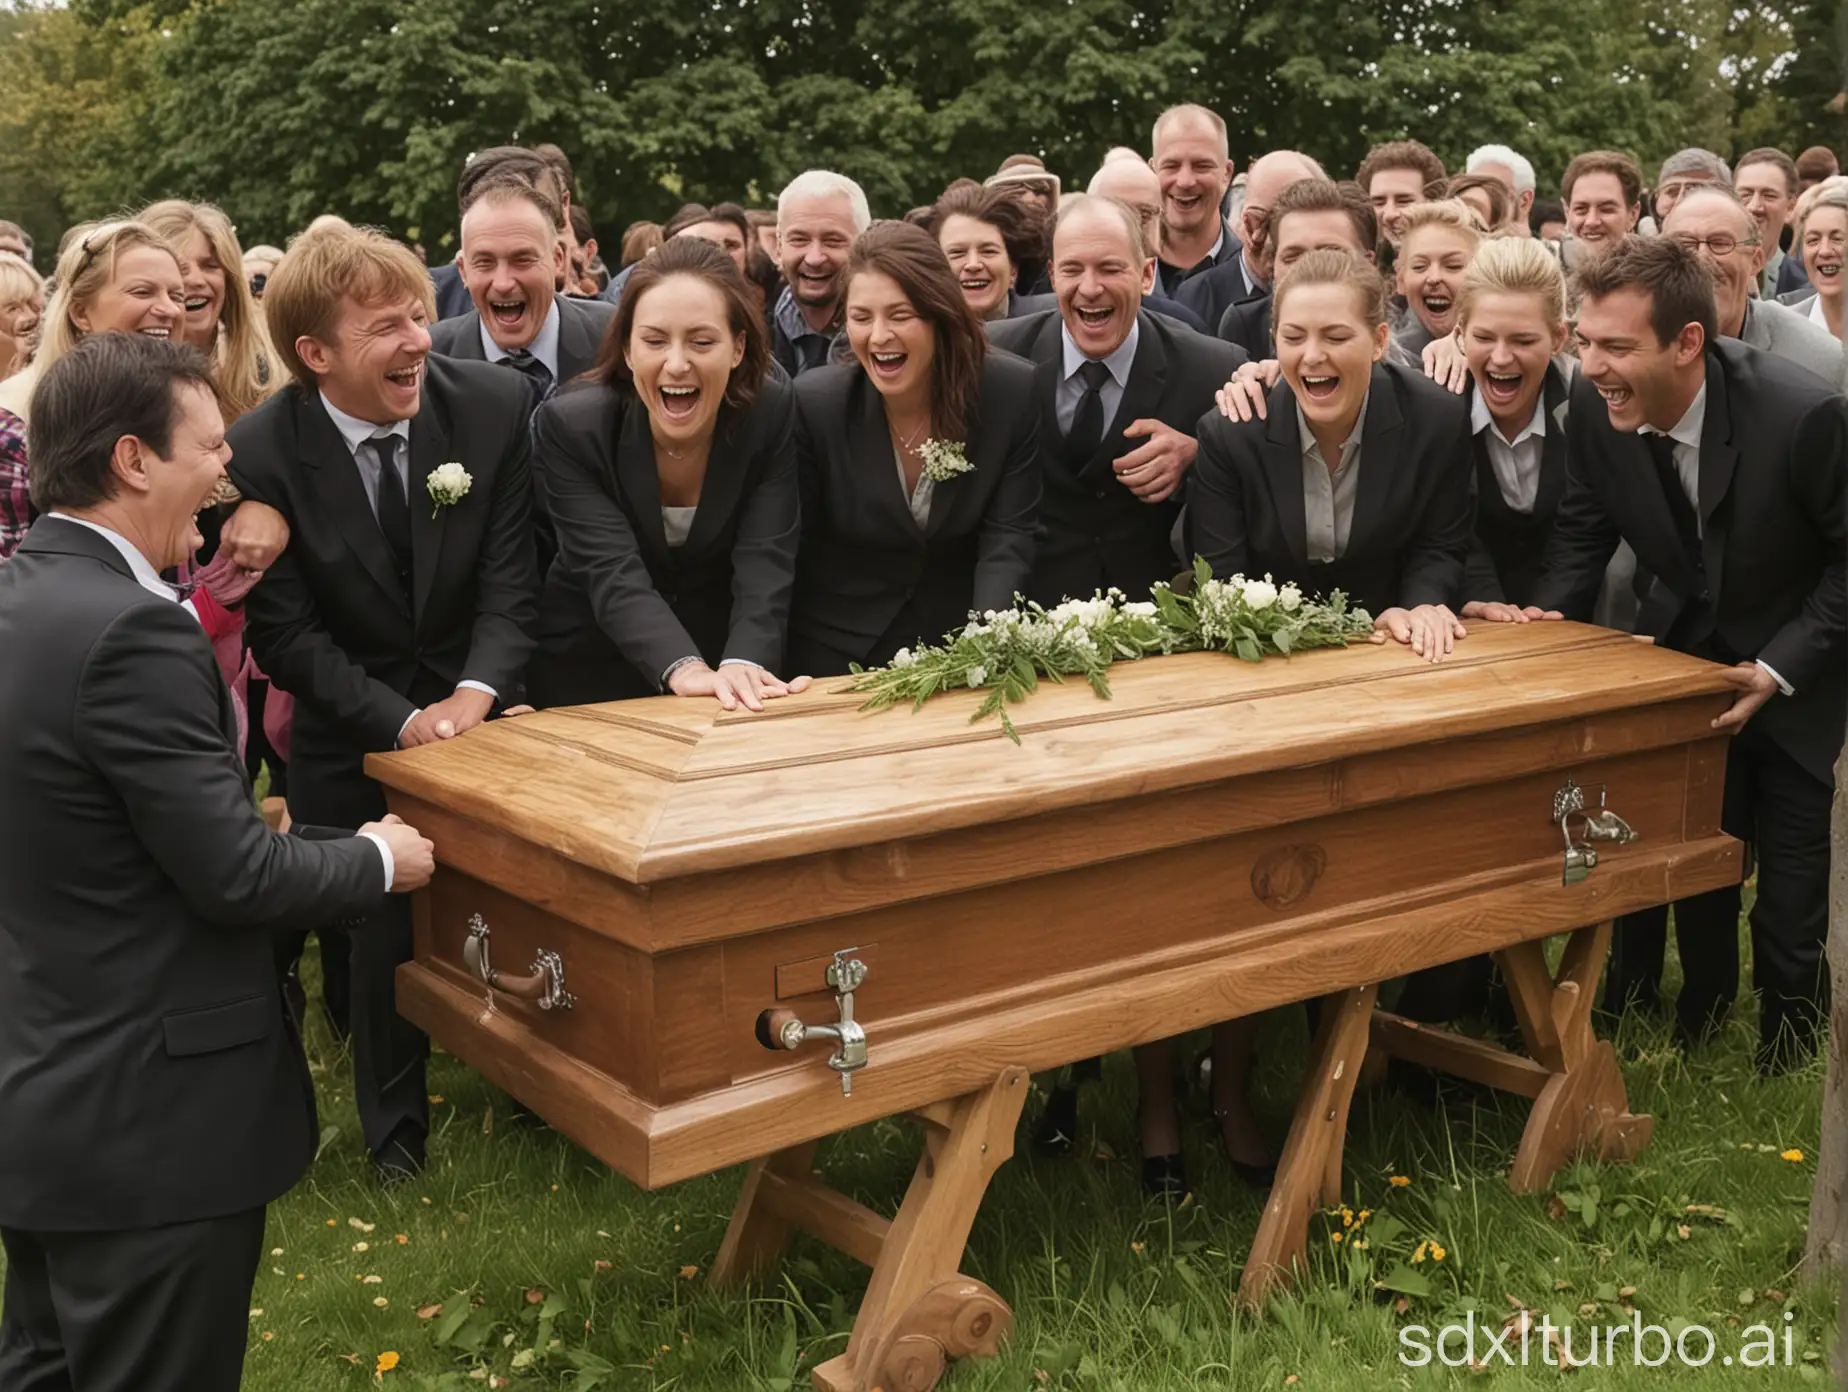 Mourners-Finding-Solace-in-Laughter-at-Coffin